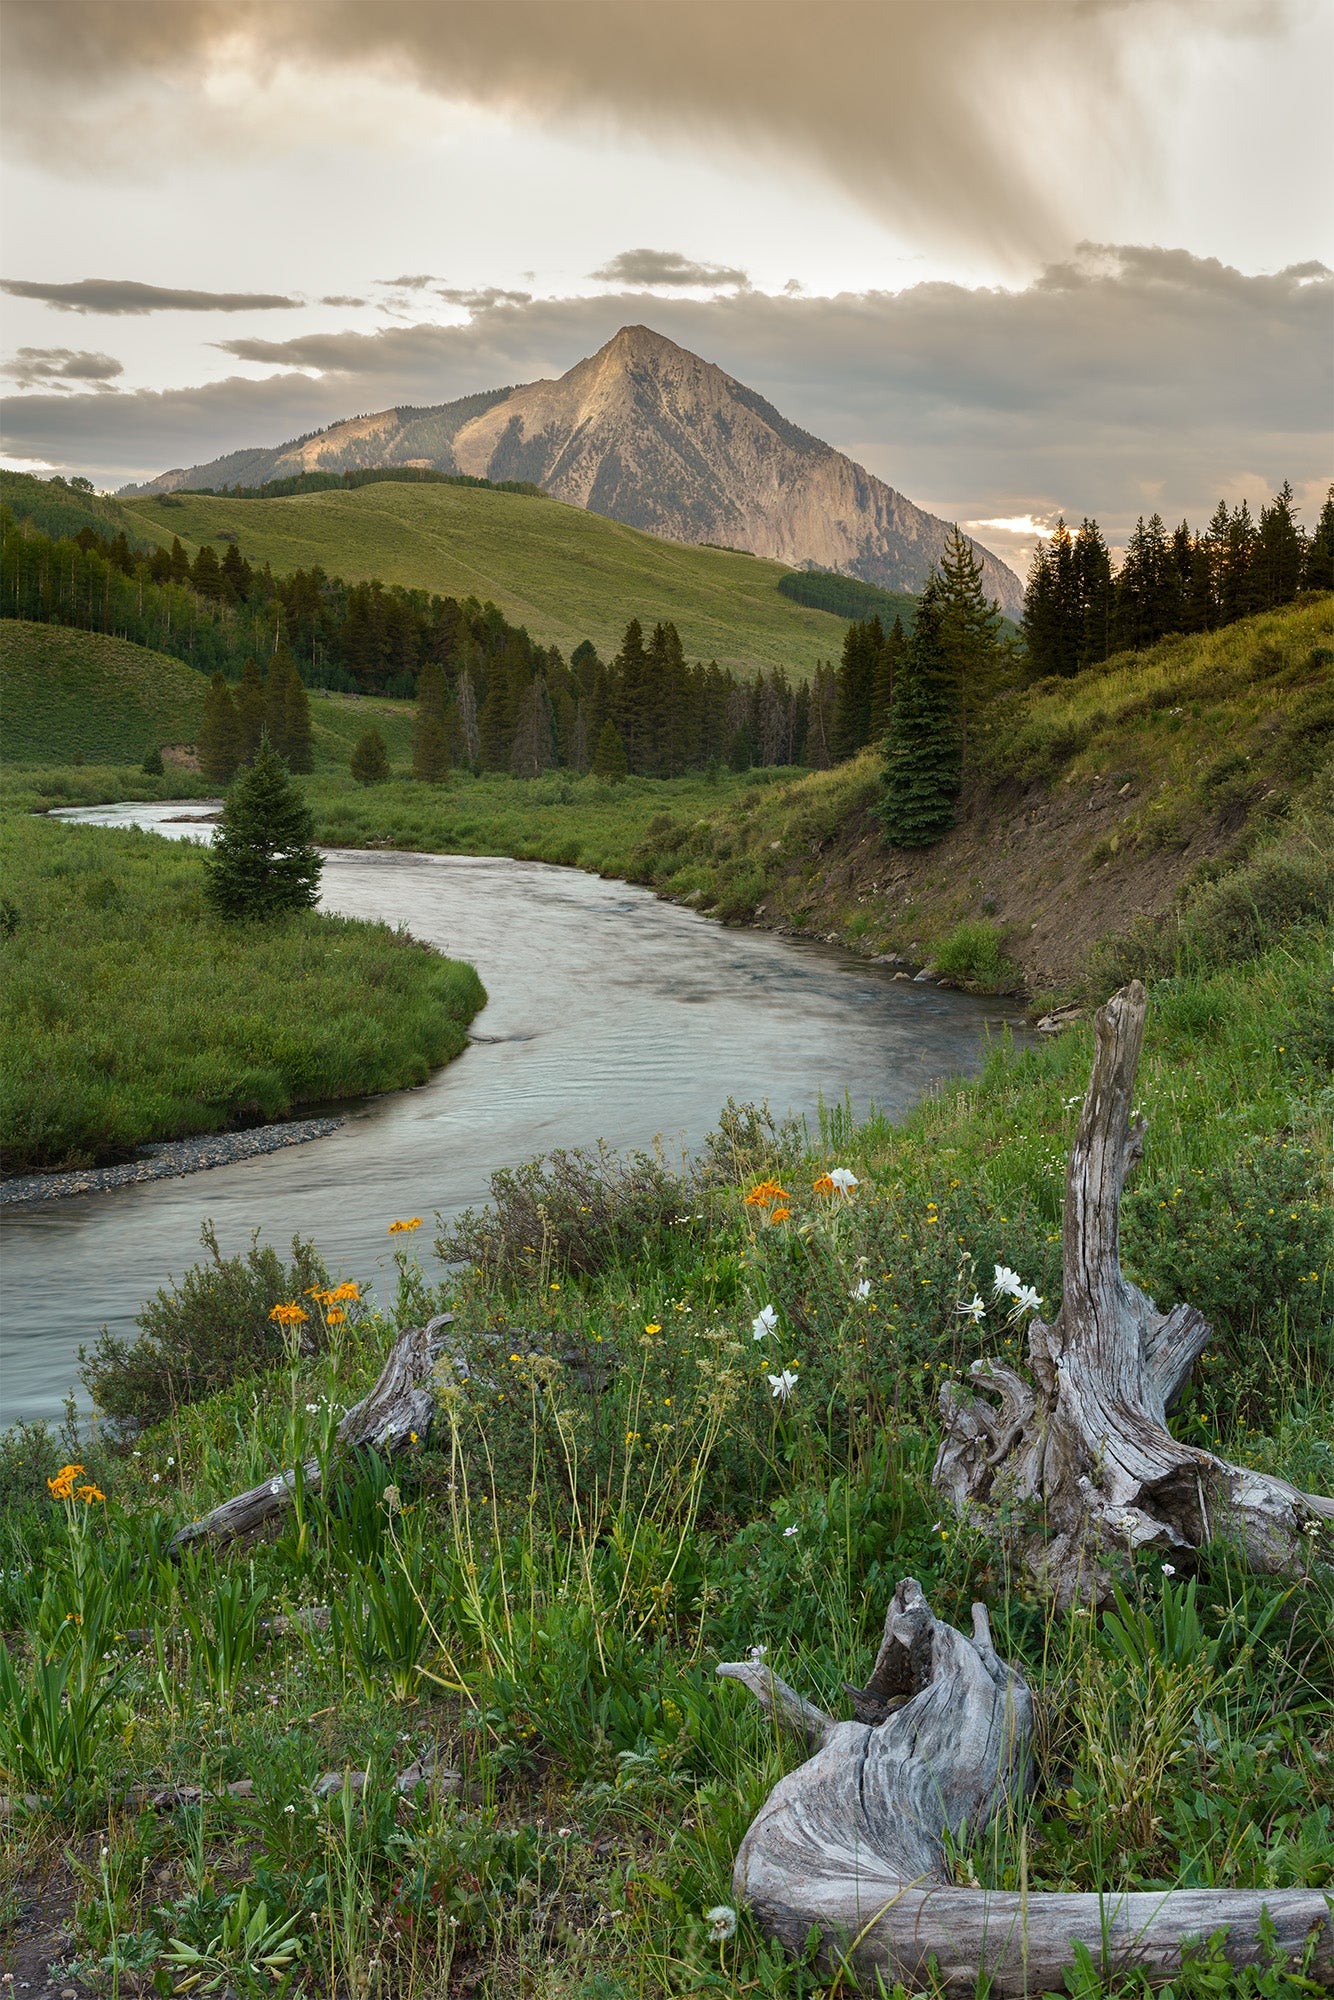 Foreground logs point towards wildflowers, the Slate River, and Crested Butte Mountain lit by the setting sun in this landscape image.